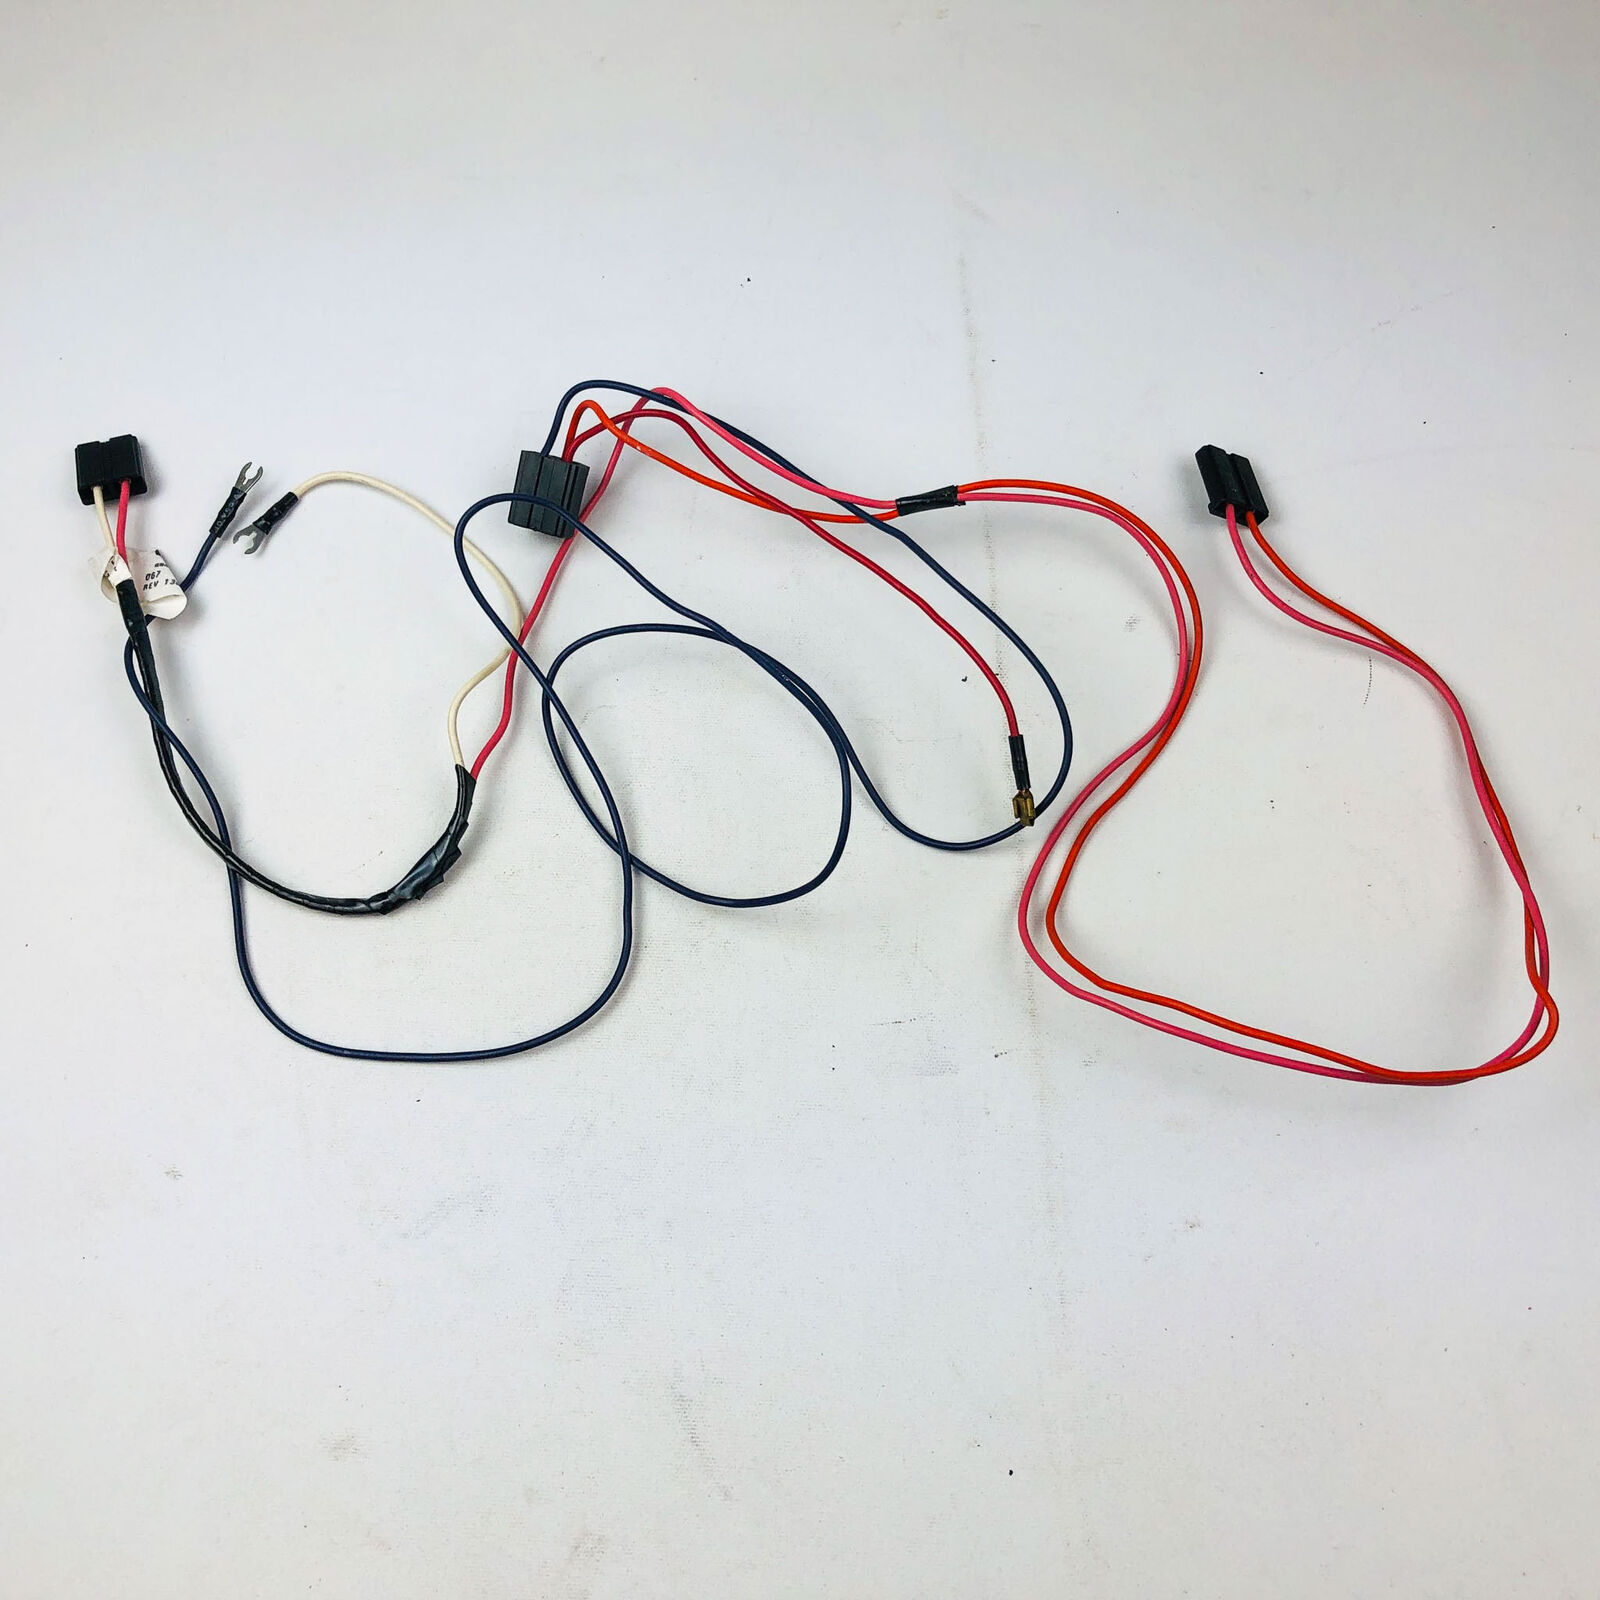 Gravely 022121 Wiring Harness Replaced By 20353700 816S Genuine OEM New NOS